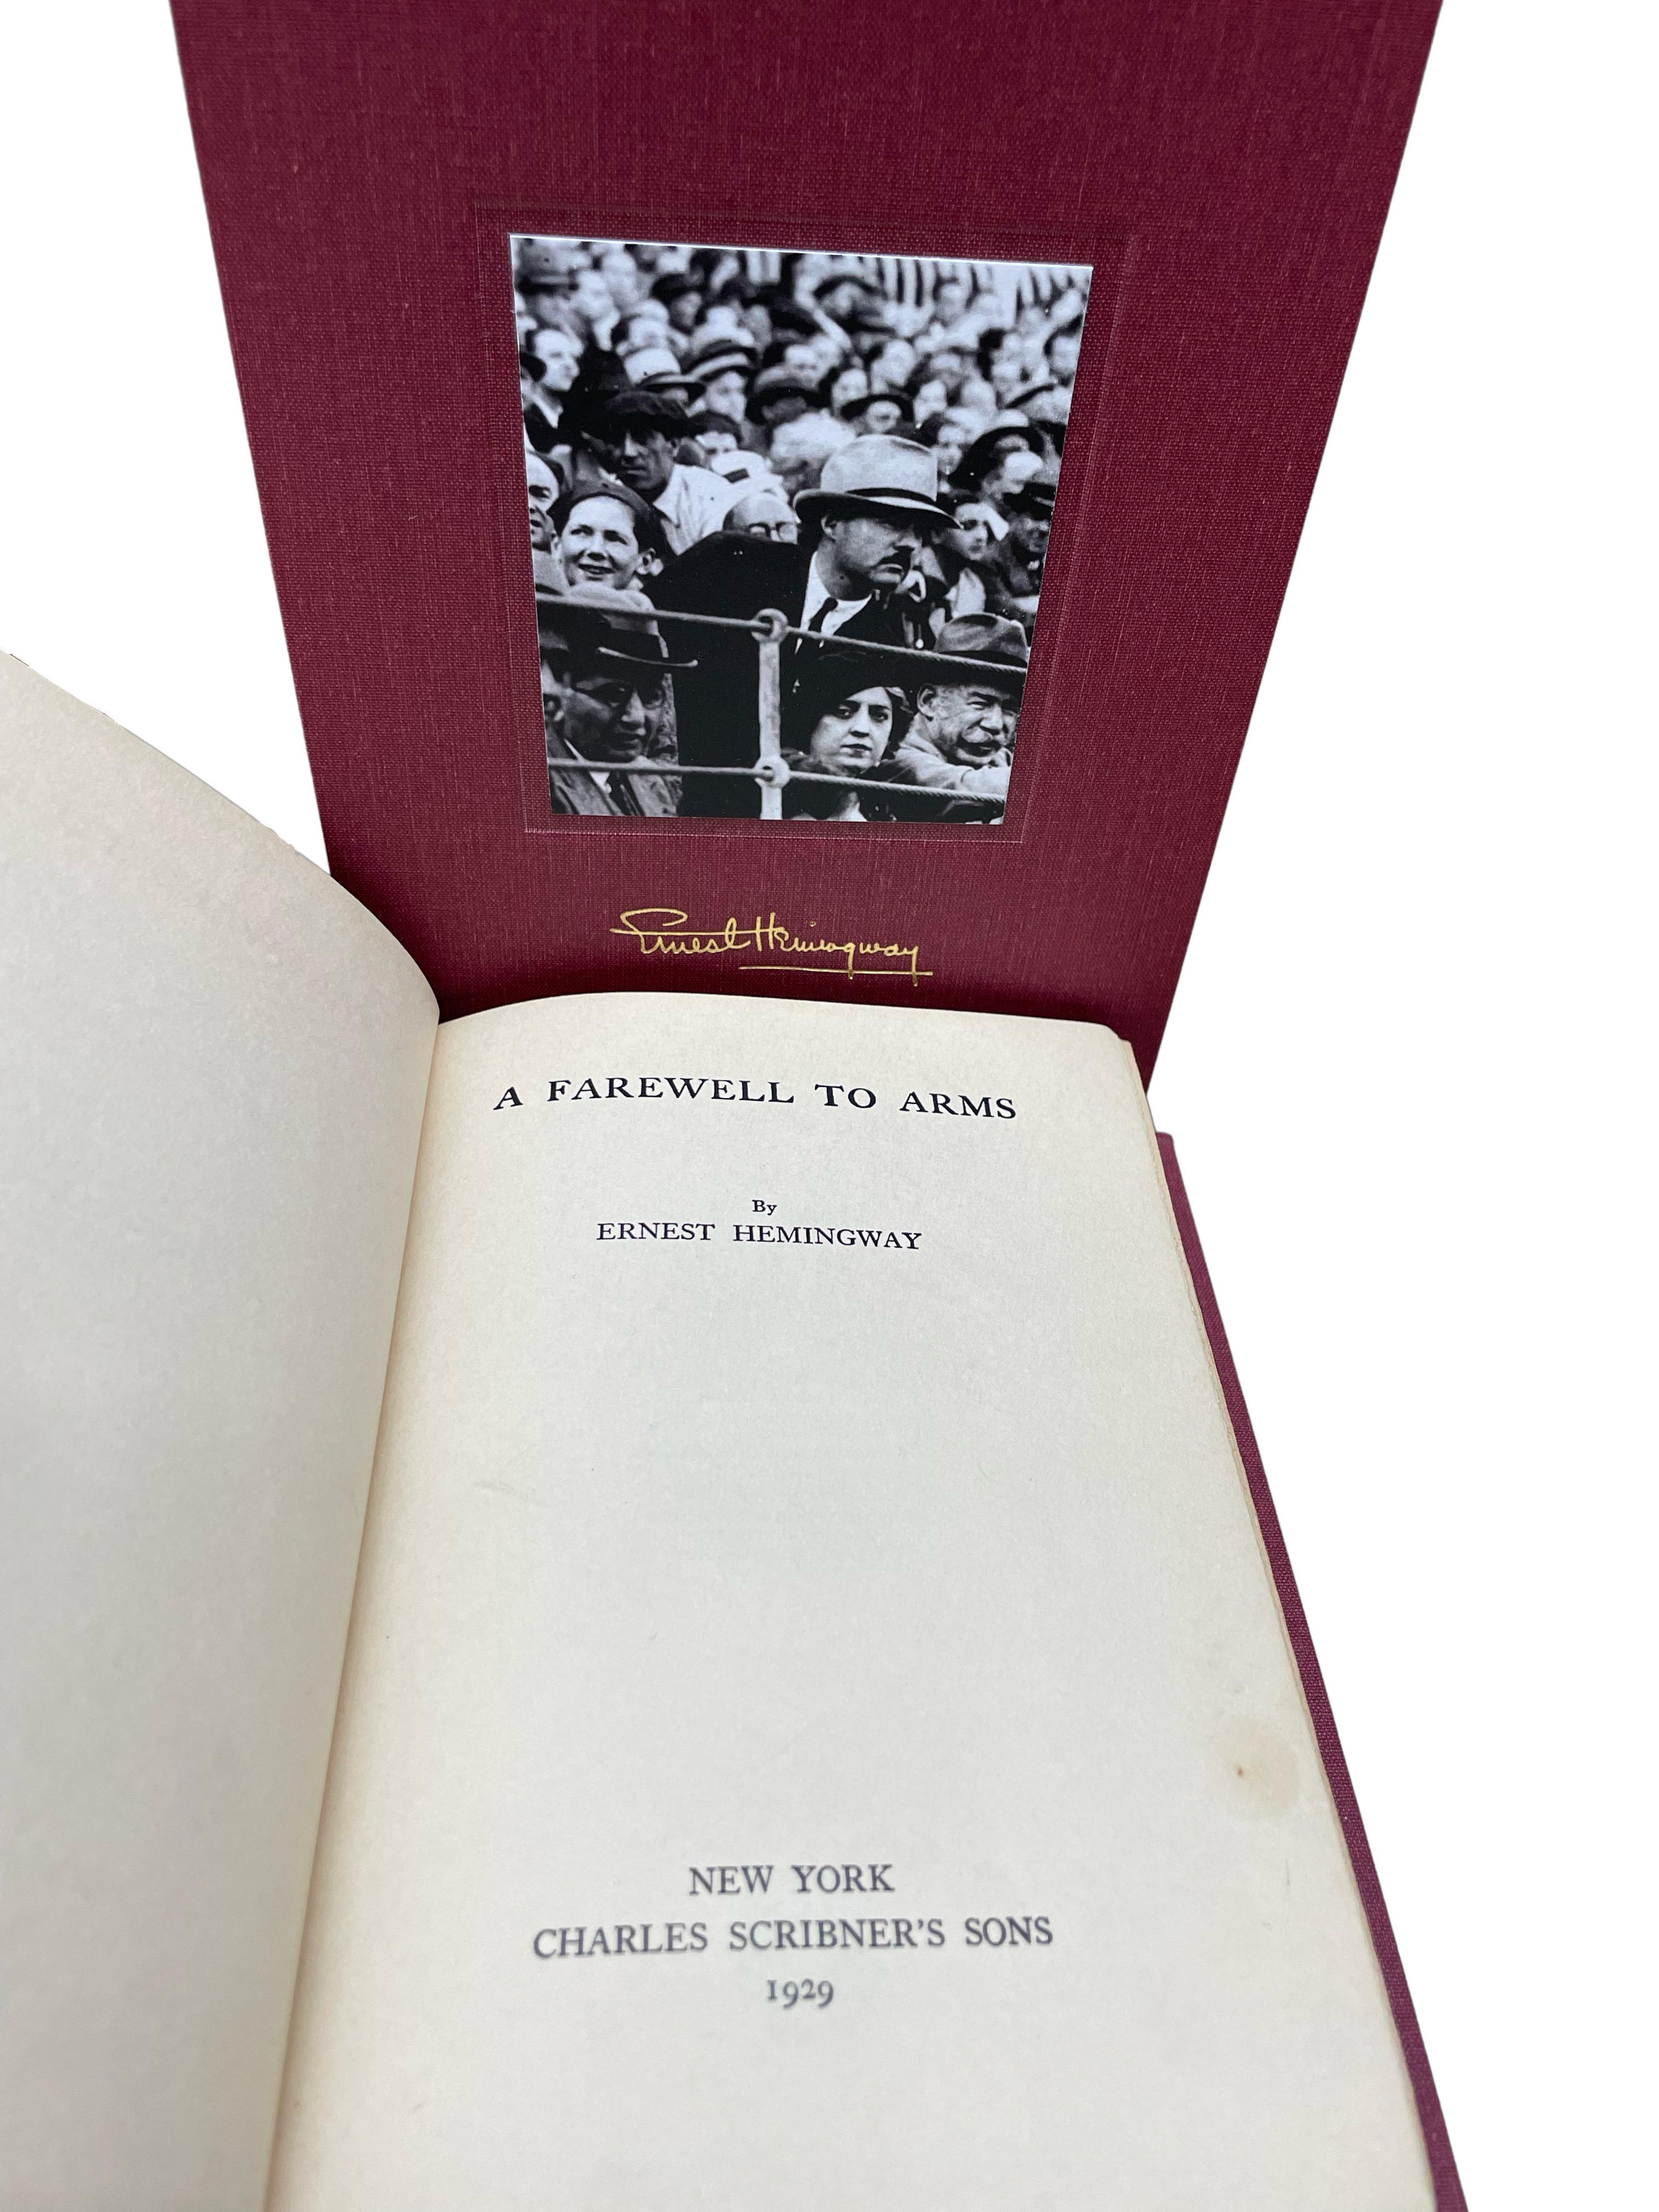 Hemingway, Ernest. A Farewell to Arms. New York: Charles Scribner's Sons, 1929. First Edition, Later printing. Octavo, Rebound in quarter leather and cloth boards with gilt titles and tooling to the spine. In a new archival cloth